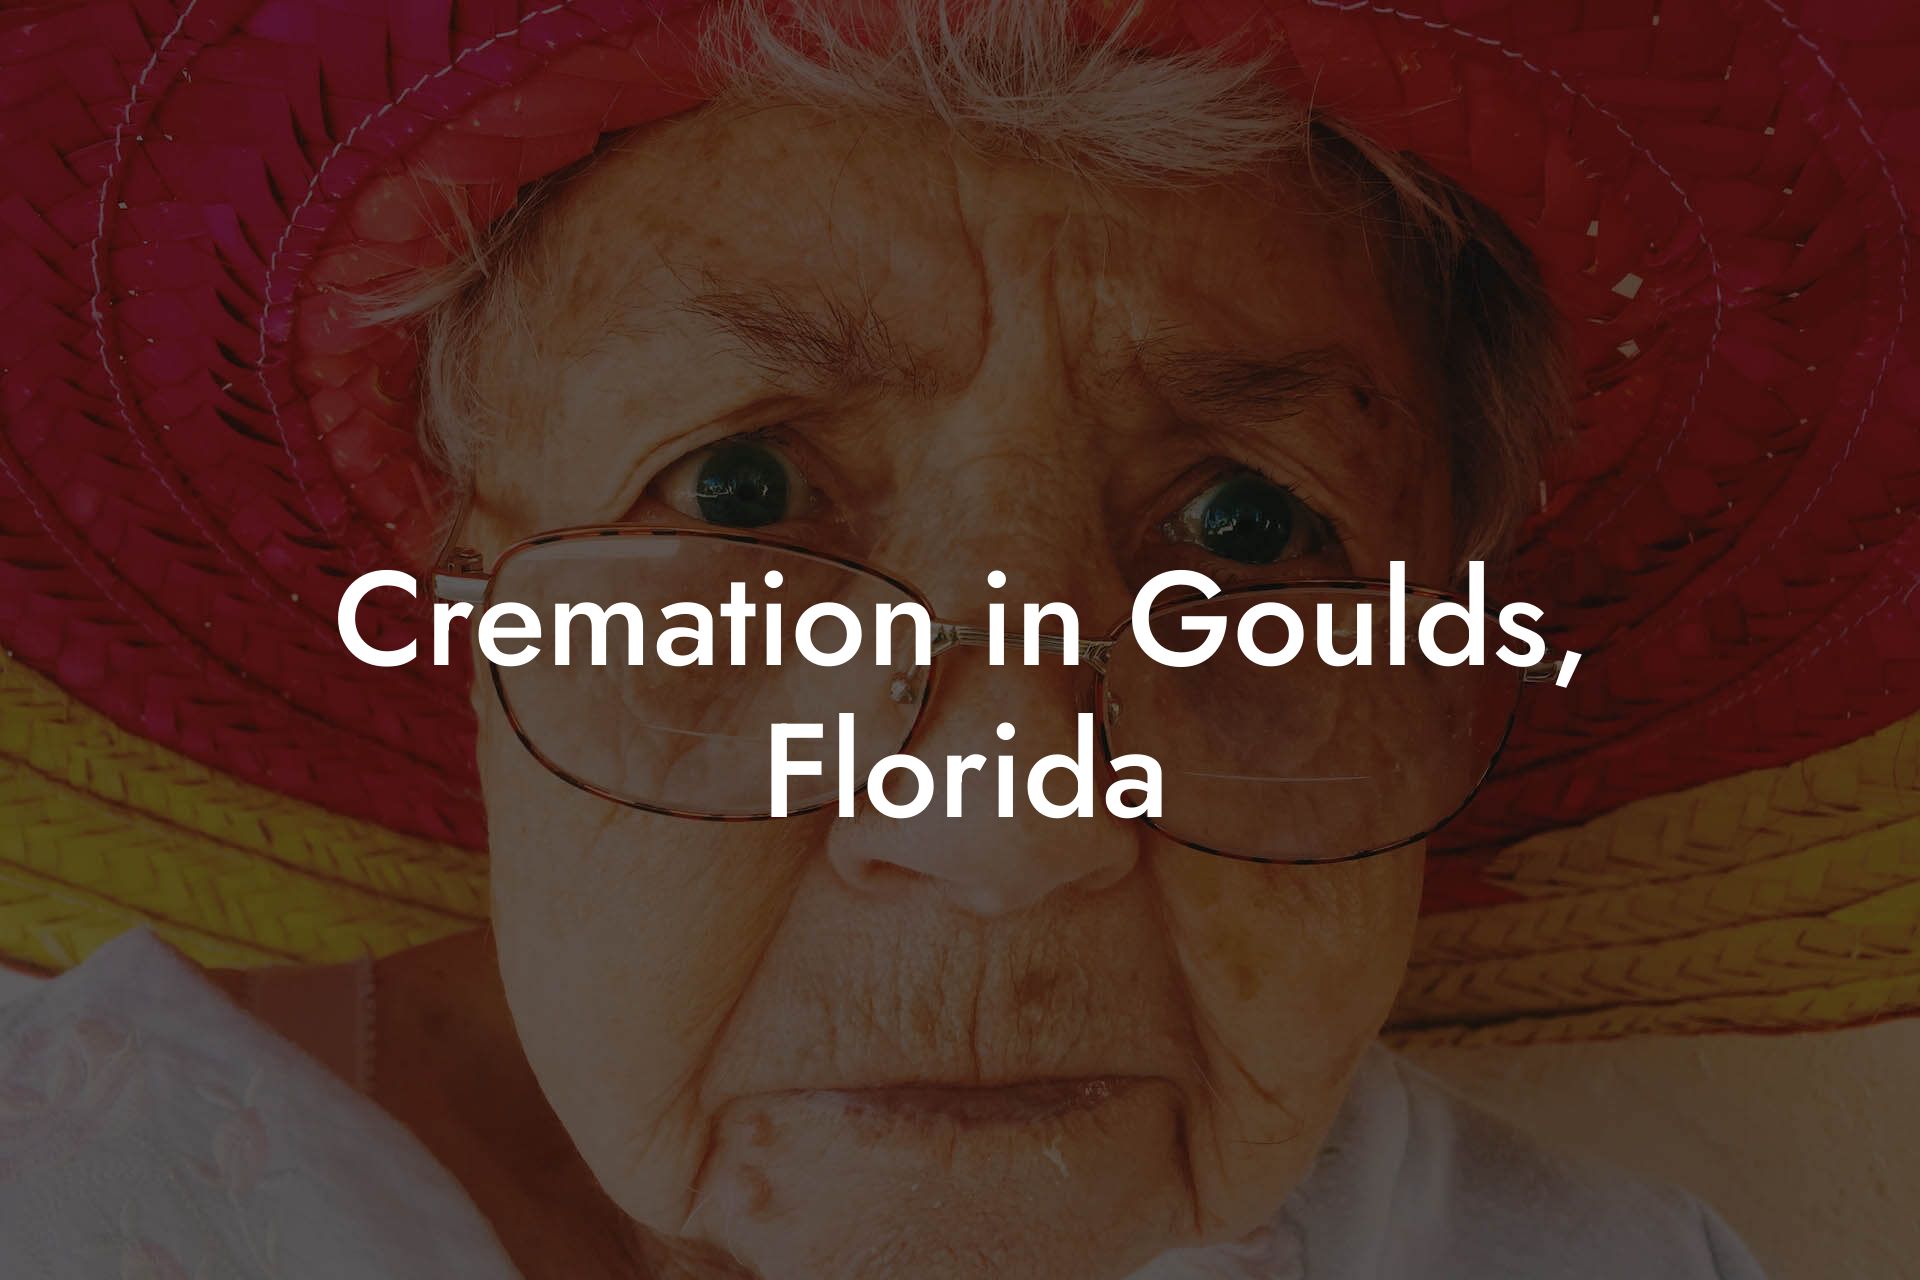 Cremation in Goulds, Florida